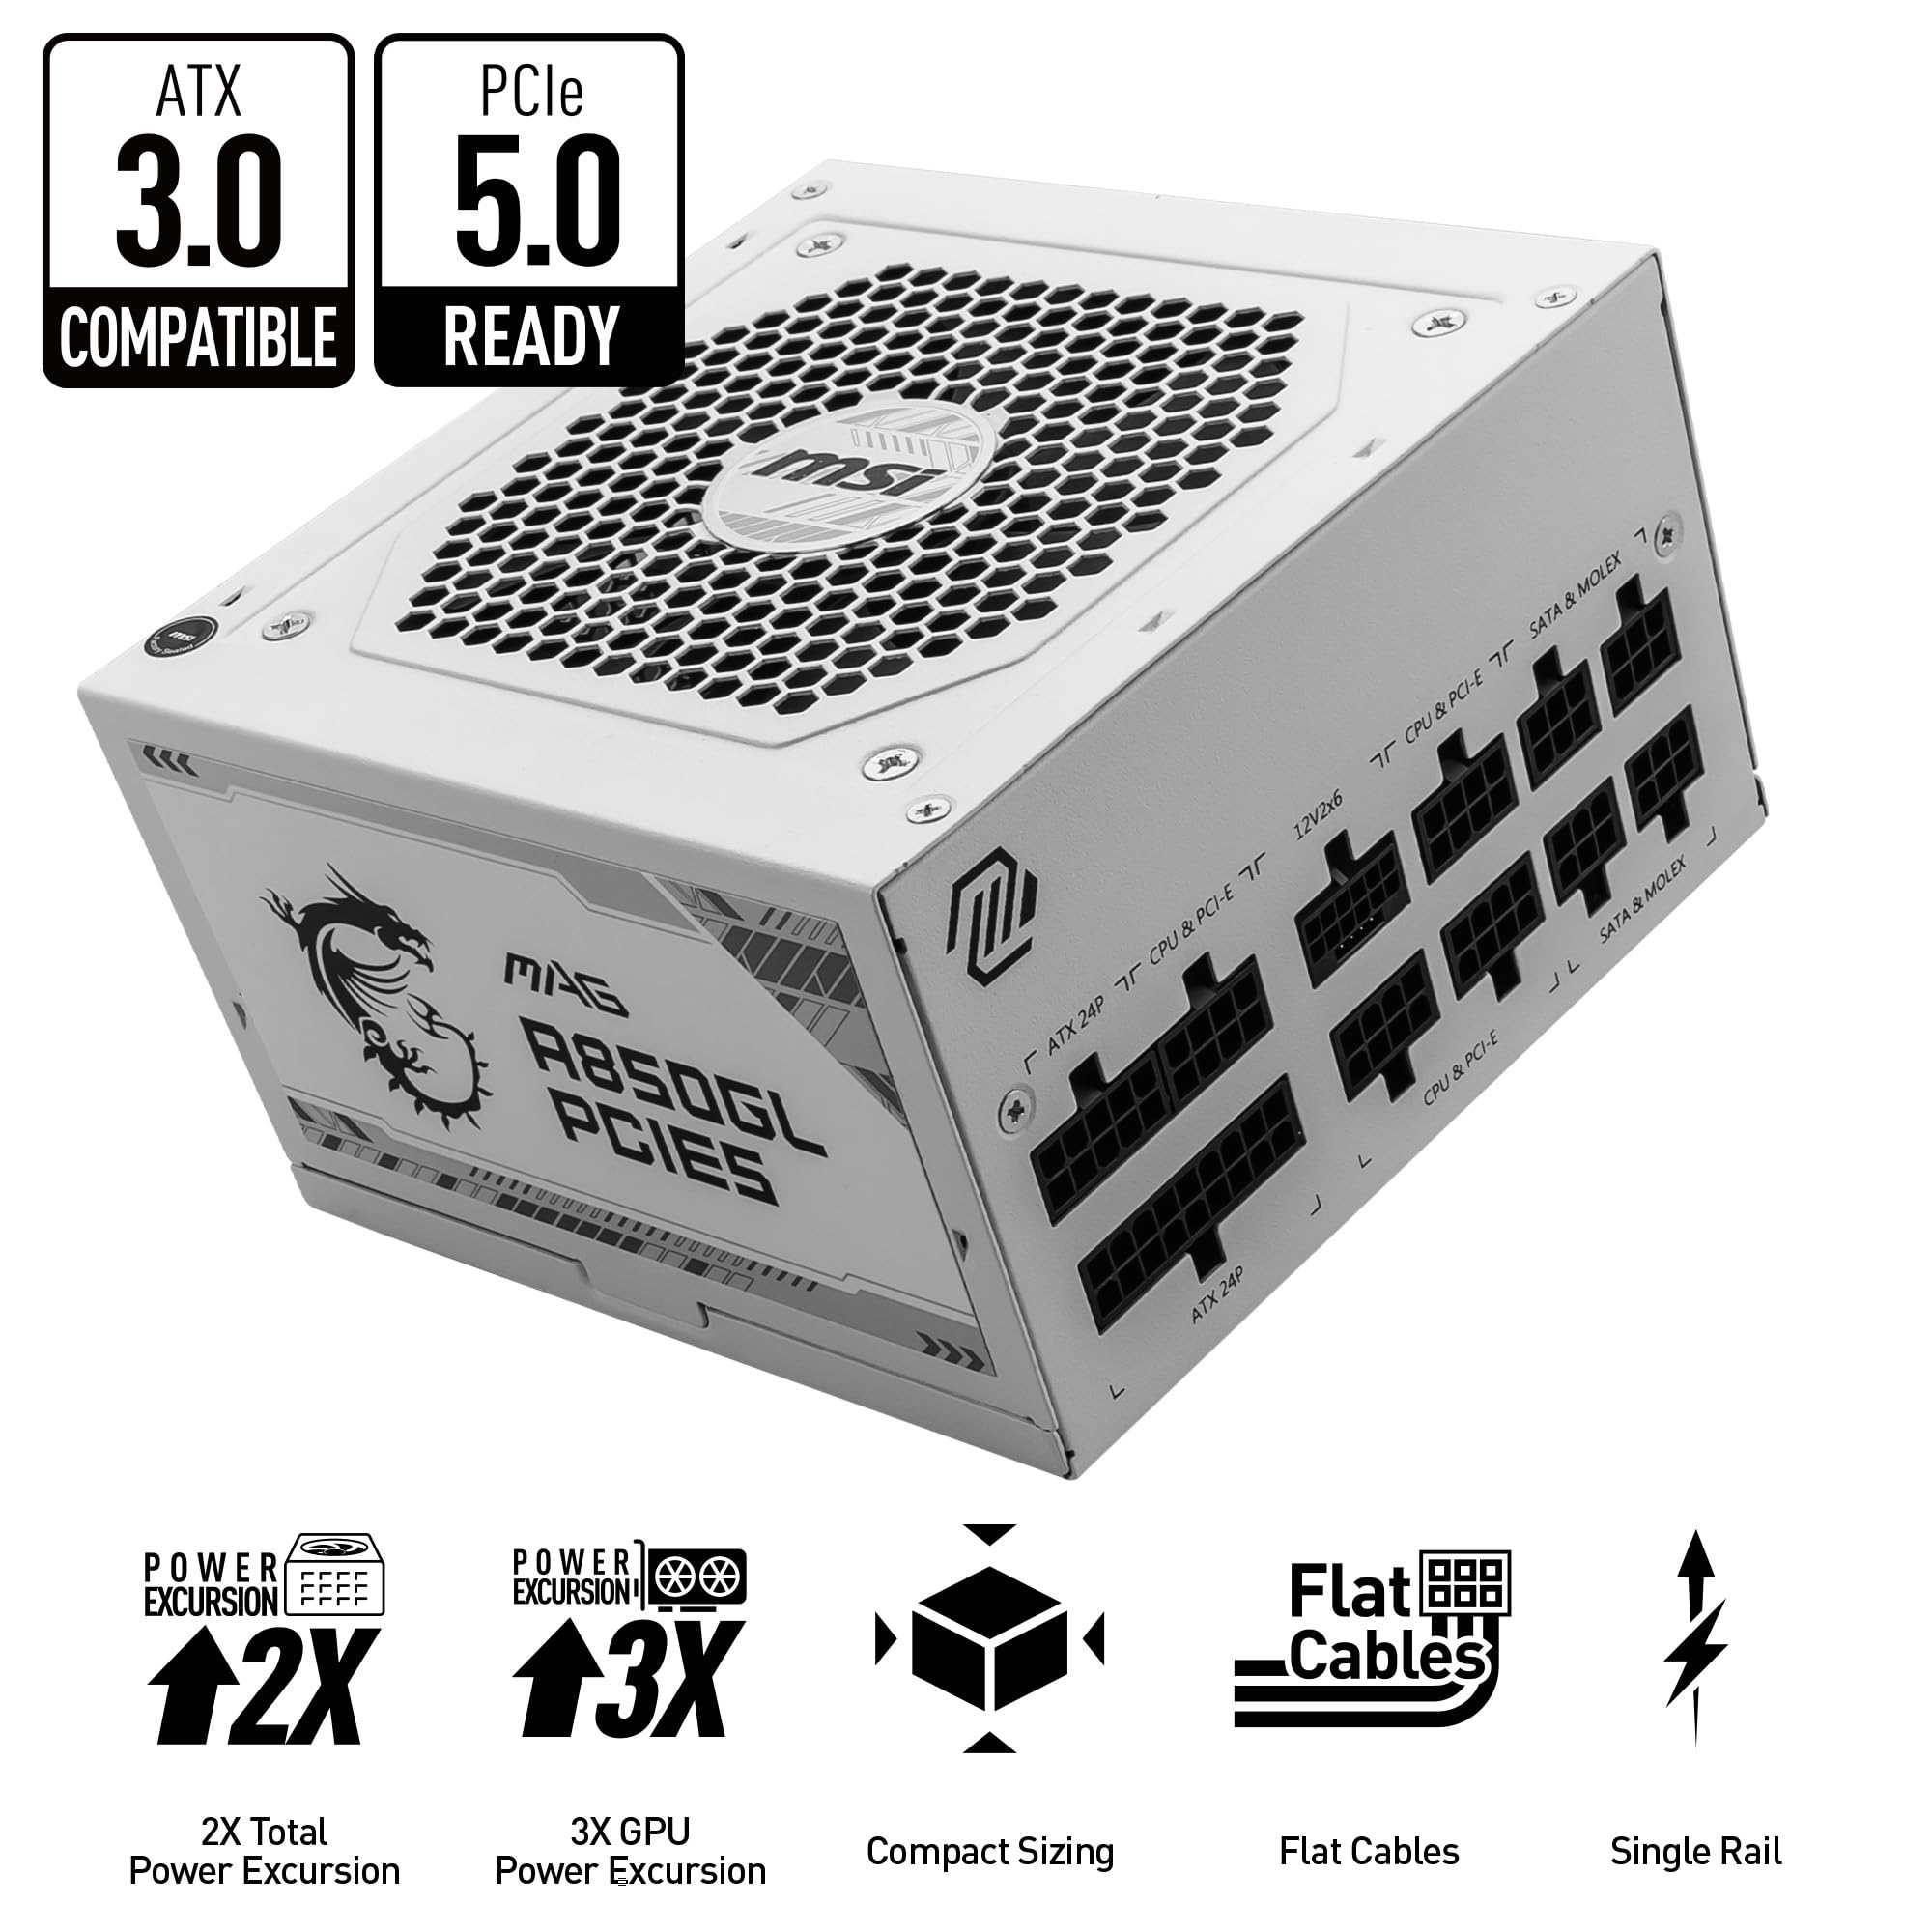 MSI MAG 850GL PCIE 5 White Gaming Power Supply - Full Modular - 80 Plus Gold Certified 850W - Compact Size - ATX PSU